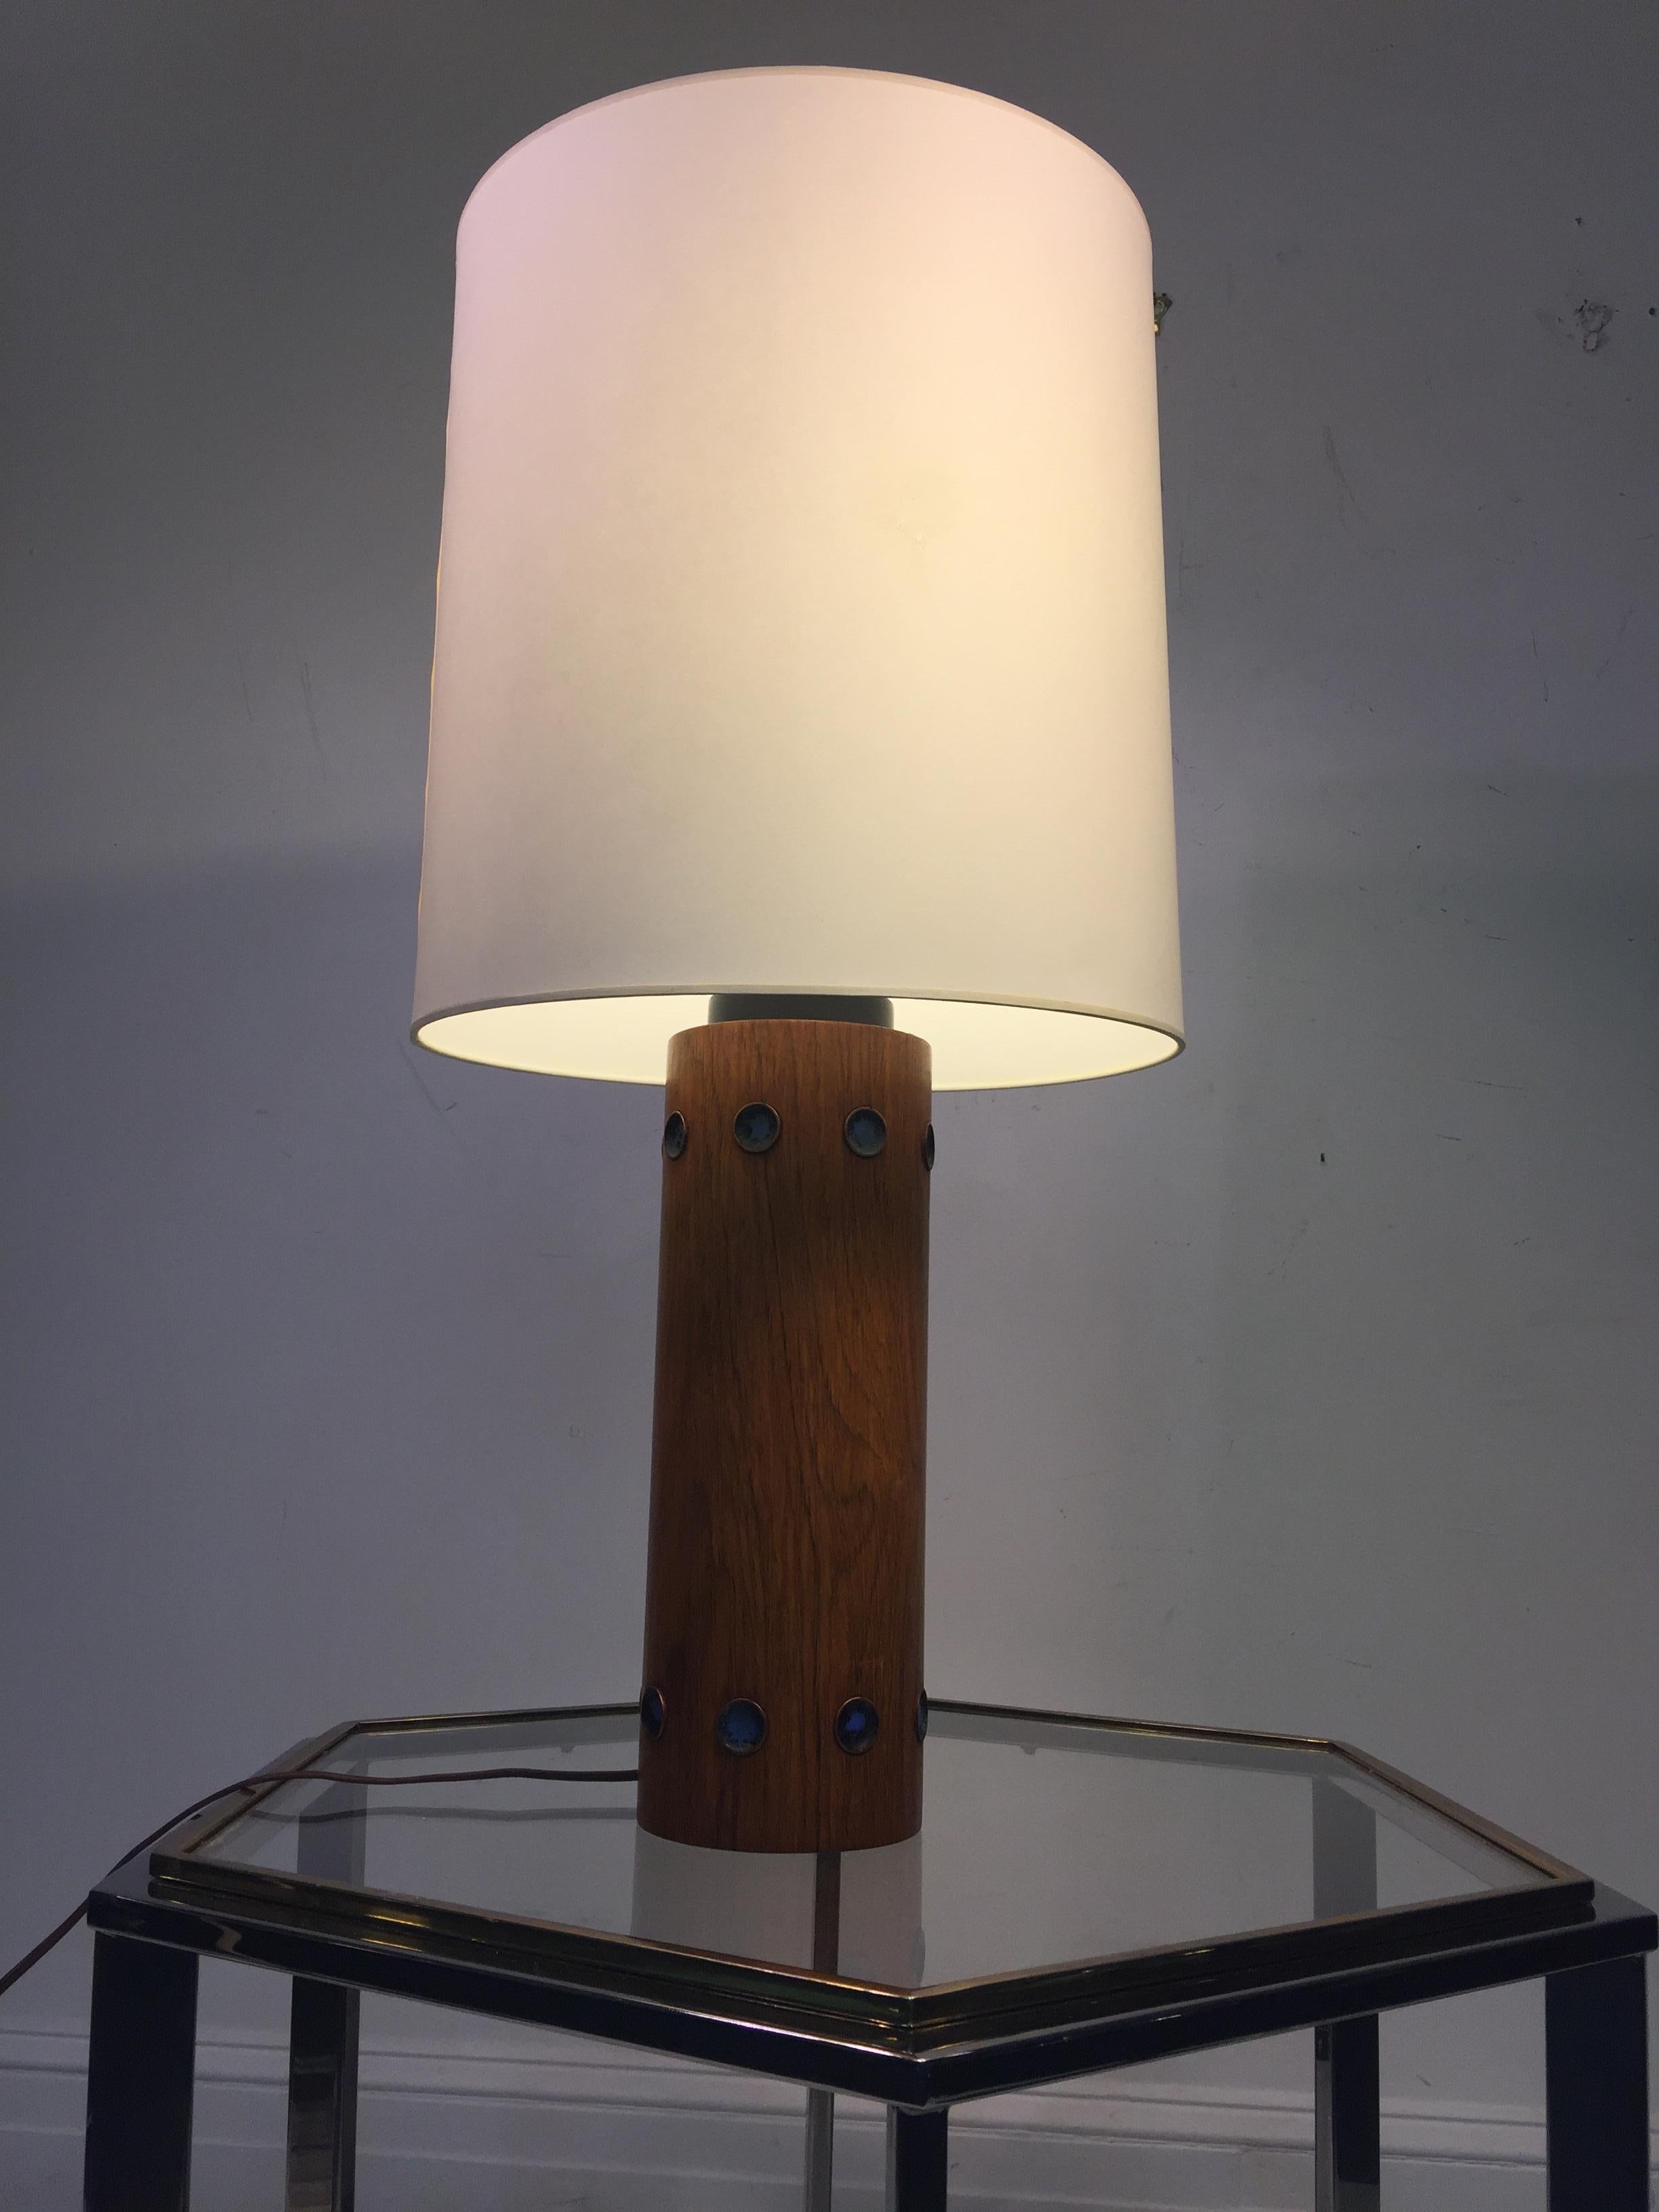 Italian striated walnut cylindrical lamps set with round enameled copper discs on top and bottom of the lamp. Enameled discs in the manner of Paolo De Poli. Designed in Italy in the 1950s-1960s. Black enameled metal stem and cap. Measurements of the